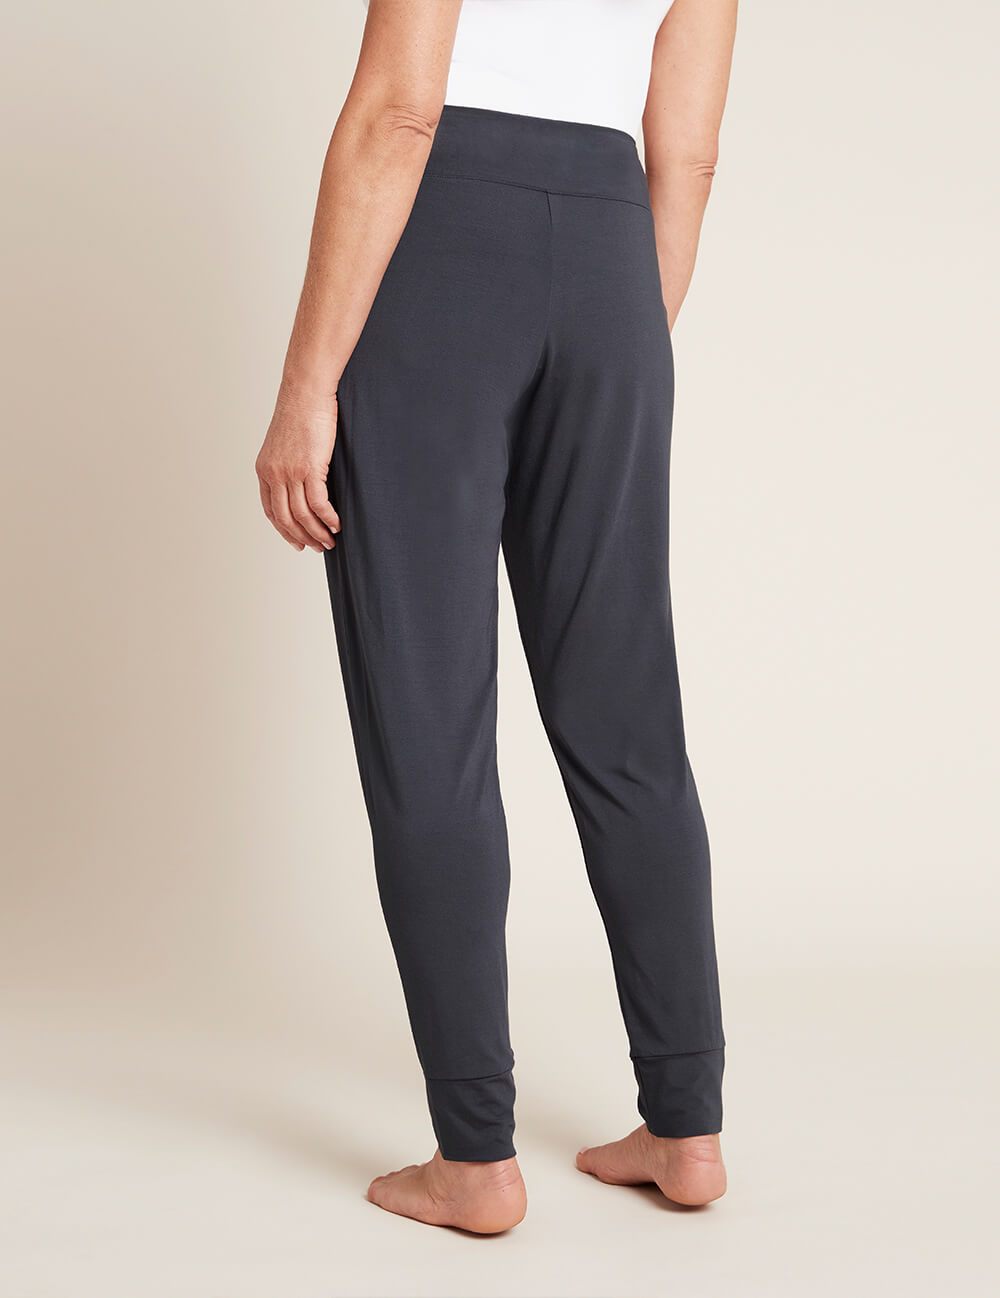 Boody Organic Bamboo Downtime Lounge Pant - Storm